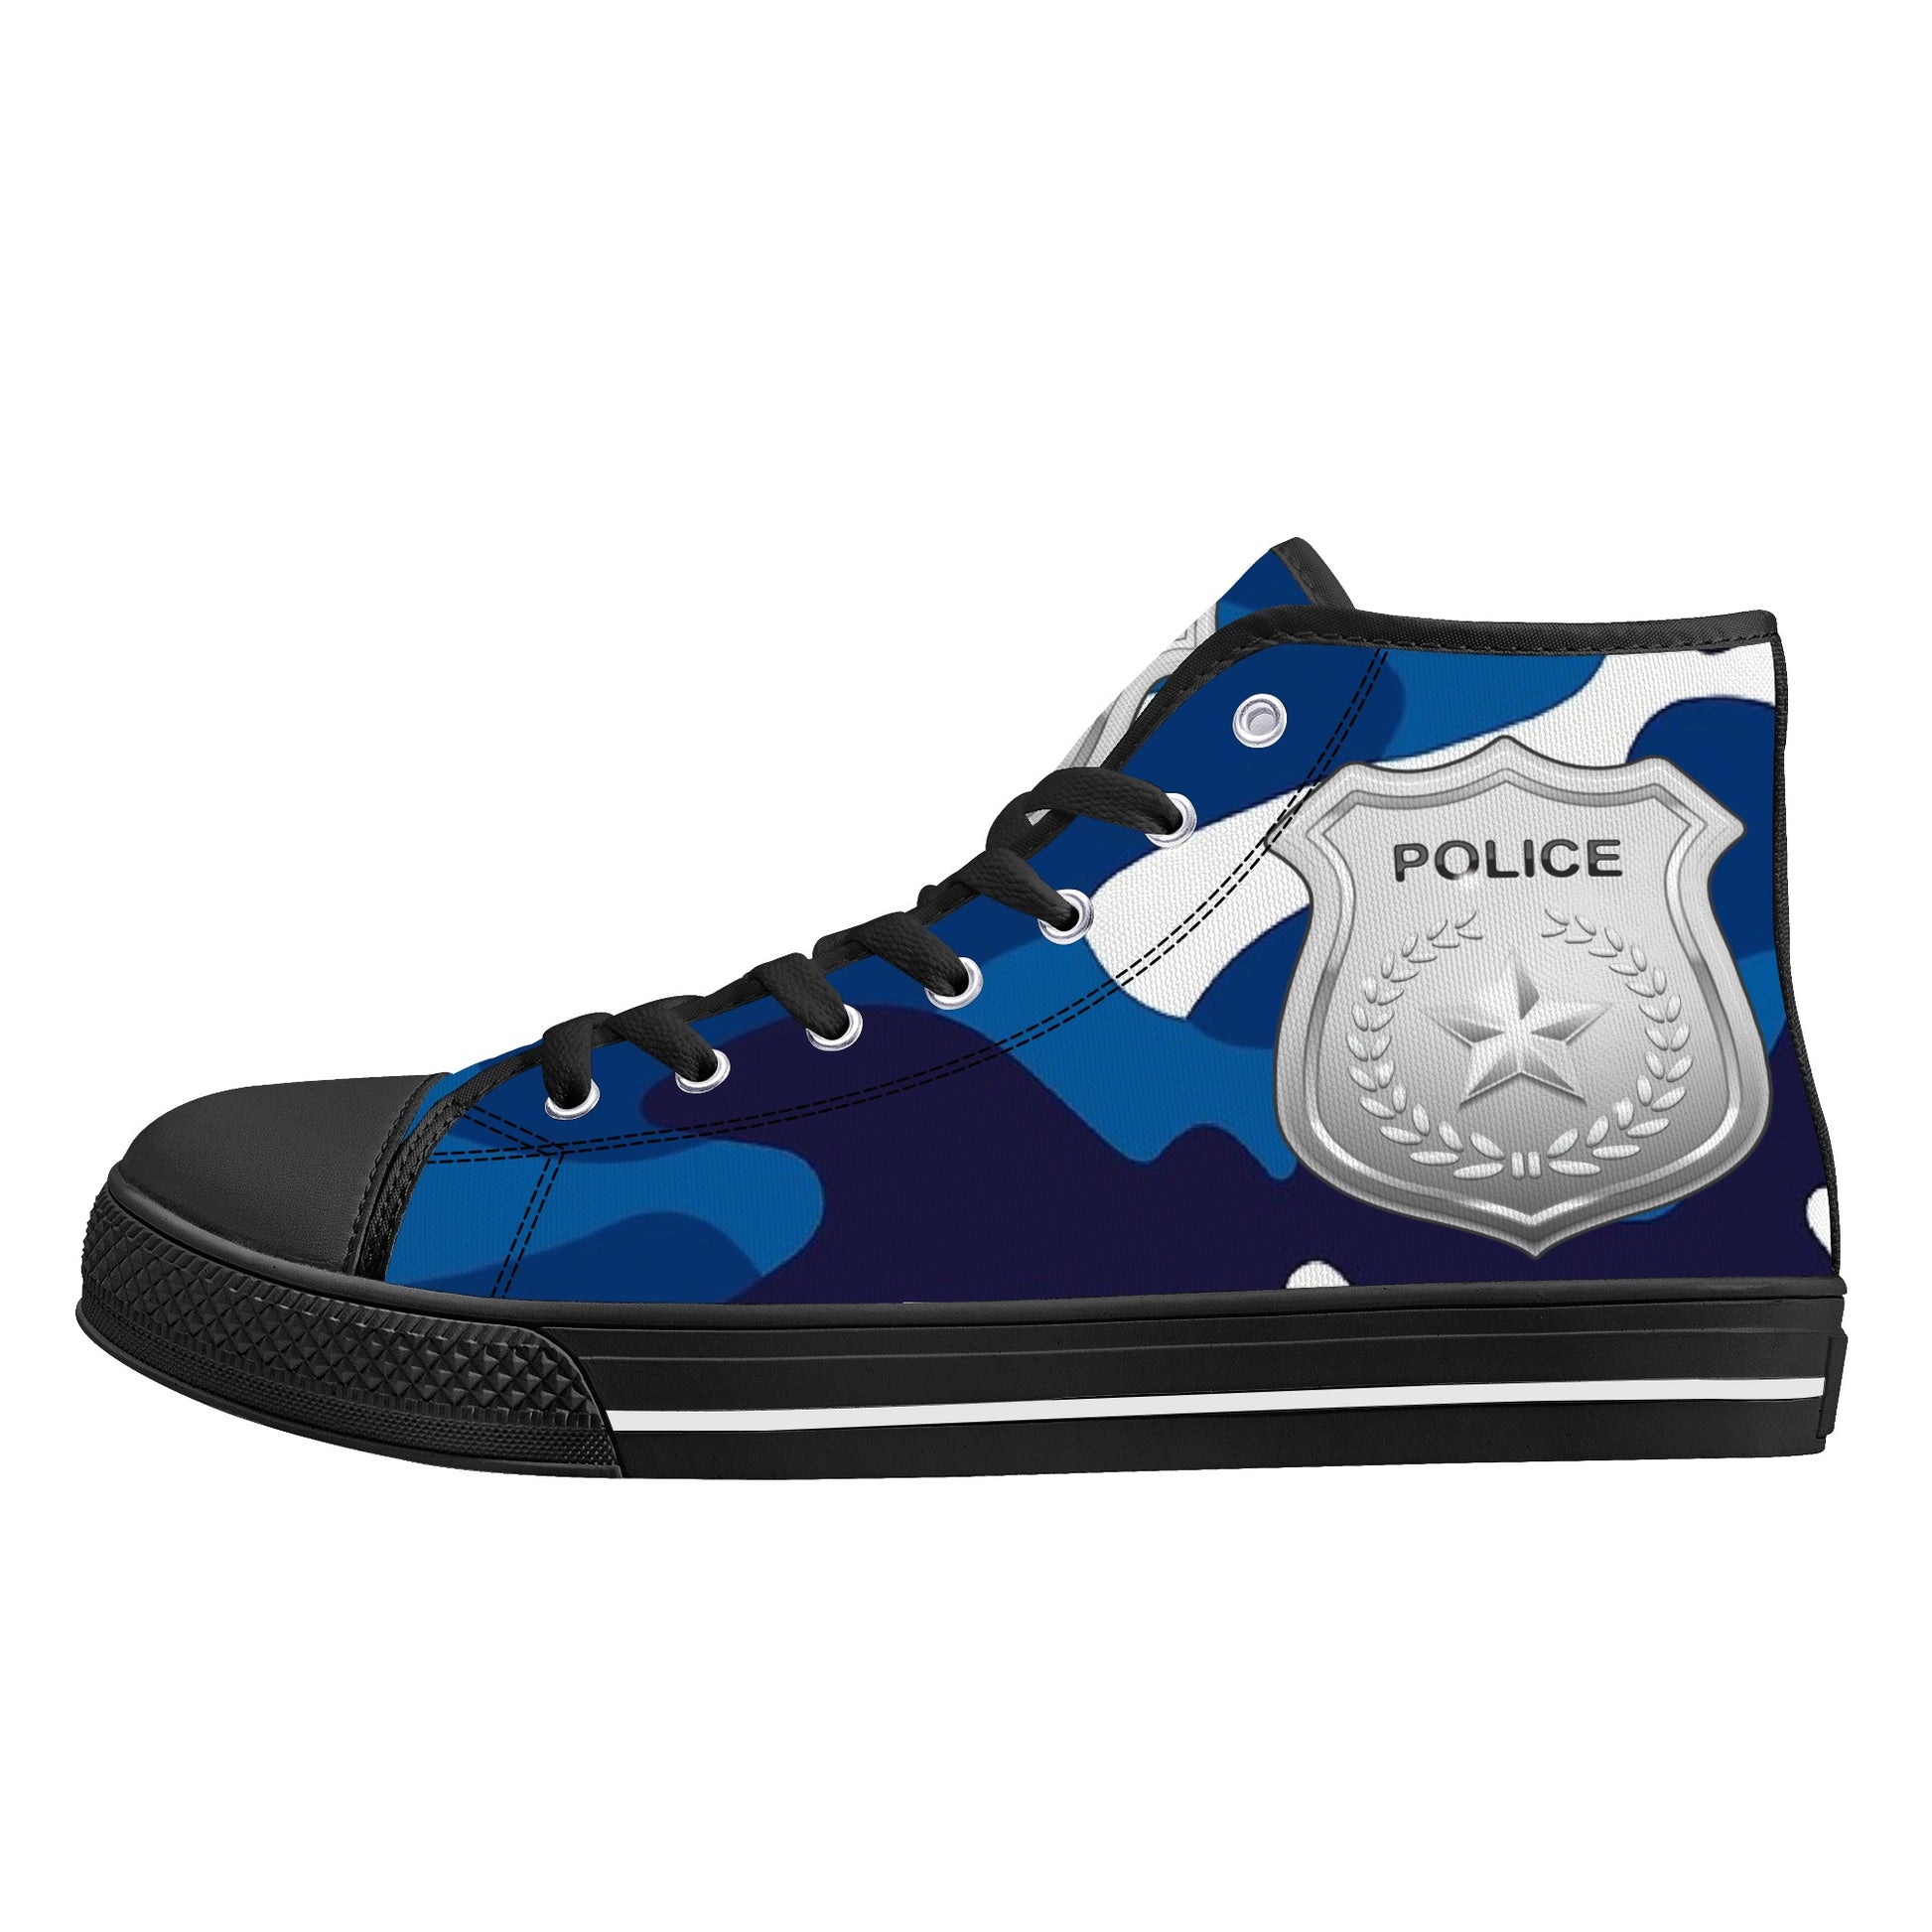 Stand out  with the  Nugget Army Police Mens High Top Canvas Shoes  available at Hey Nugget. Grab yours today!